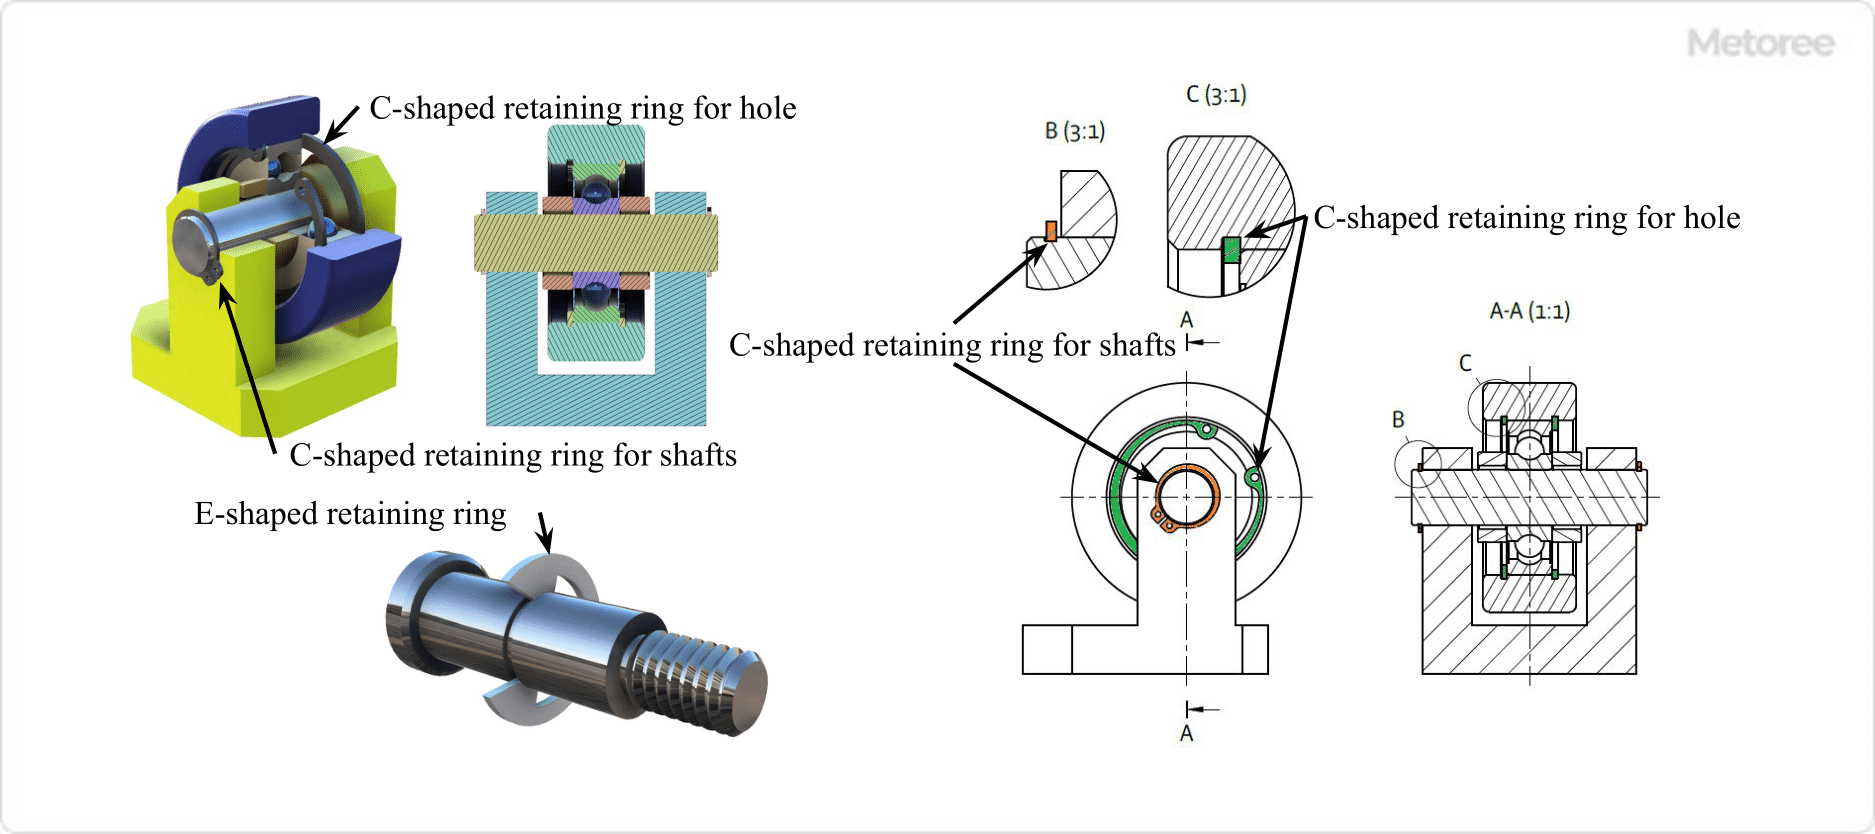 Figure 1. Example of retaining ring use